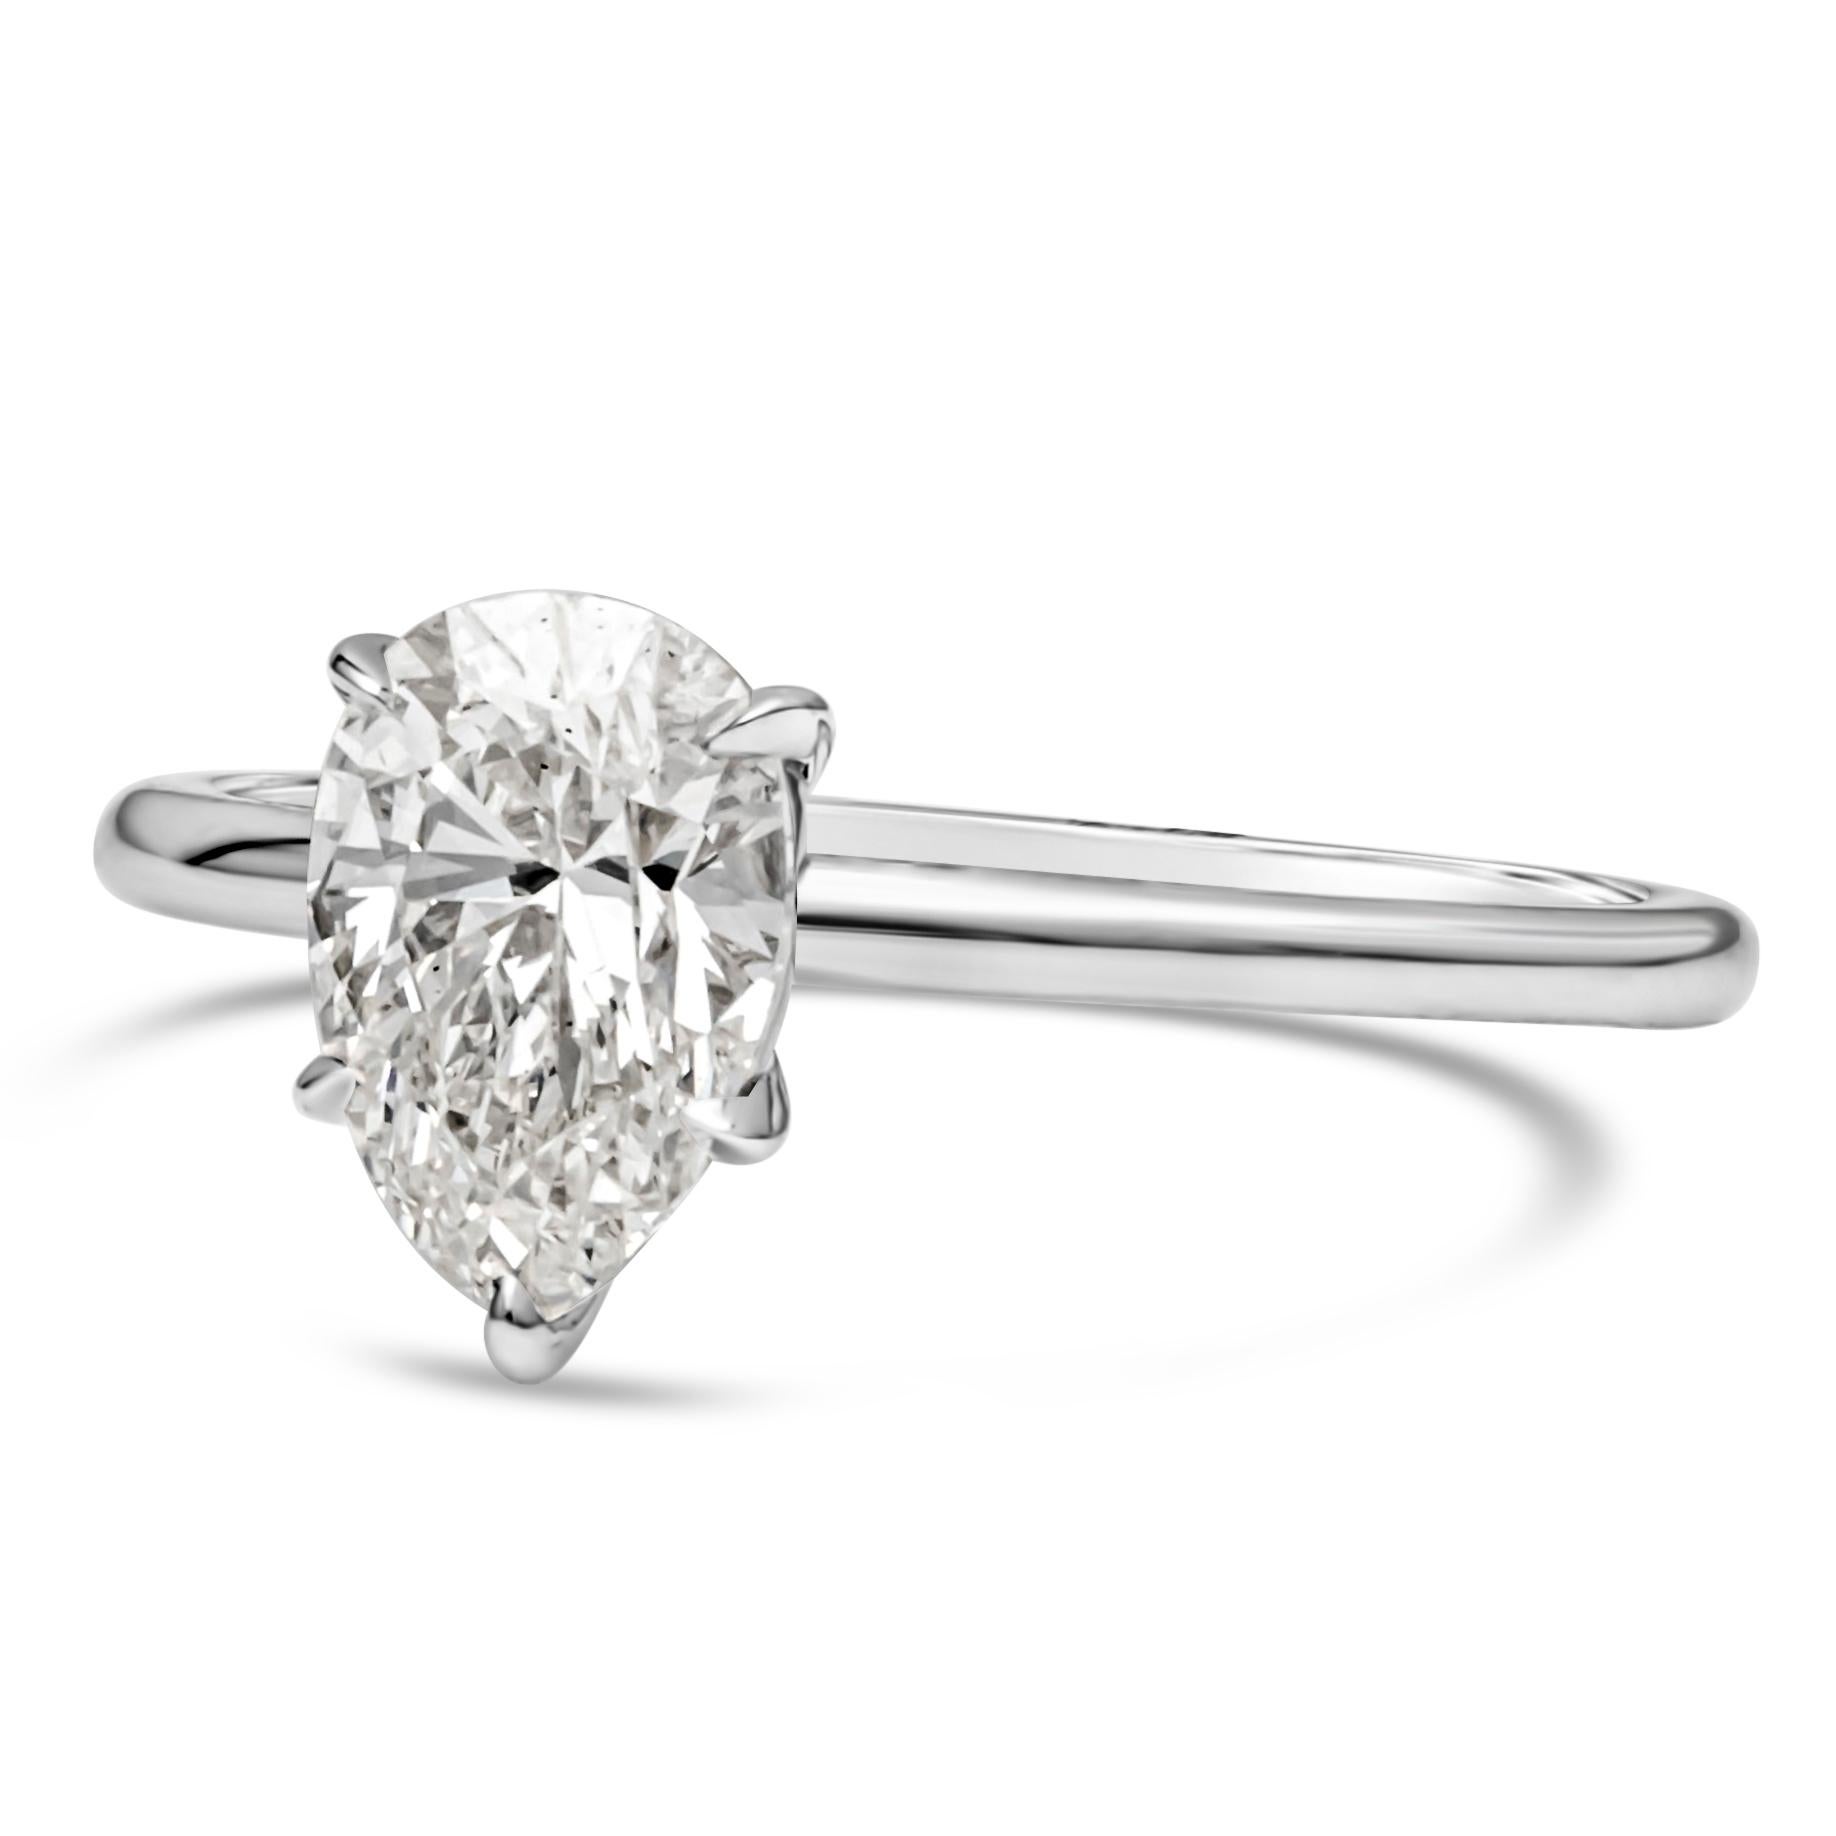 A classic and timeless engagement ring style, showcasing a 1.26 carats pear shape diamond certified by GIA as I color and SI1 clarity, set on a five prong basket and thin 14K white gold band. Size 6 US, resizable upon request.

Roman Malakov is a